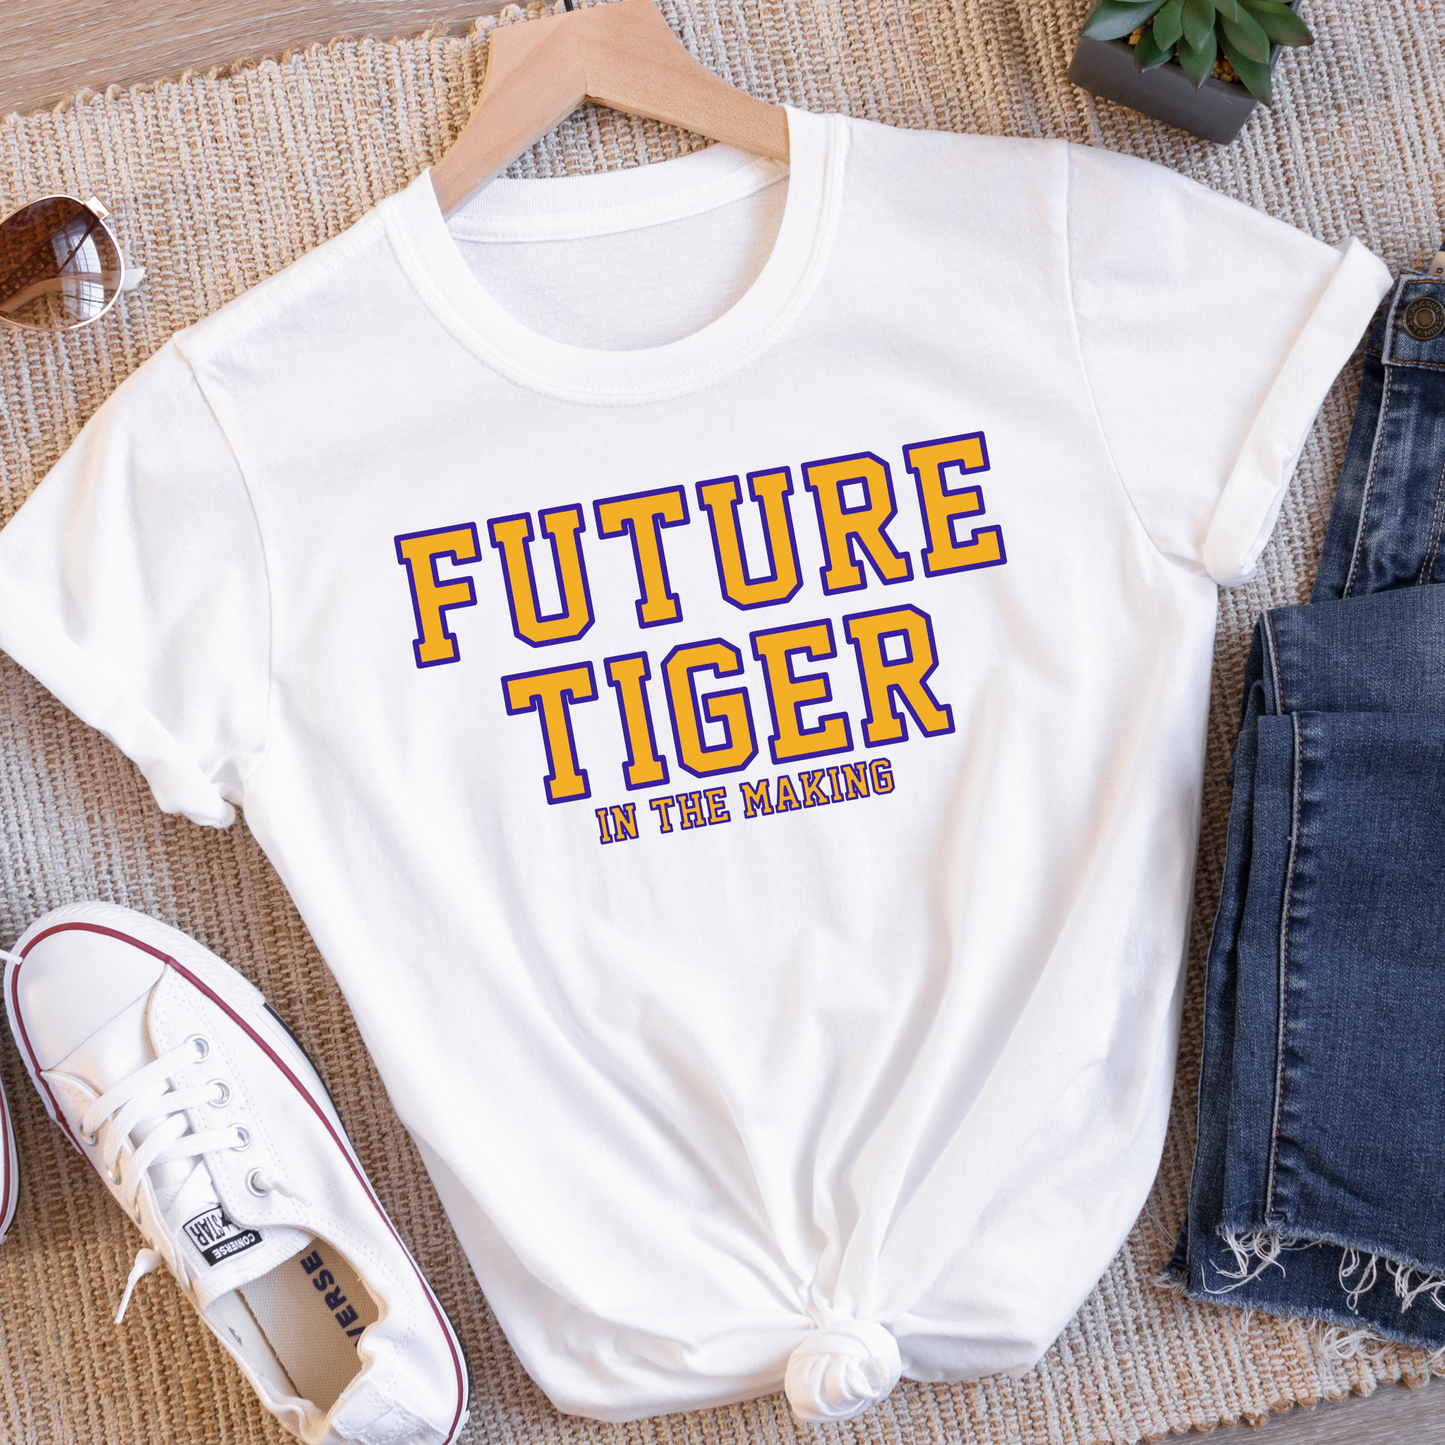 Future Tiger in the Making - Maternity & Unisex Regular